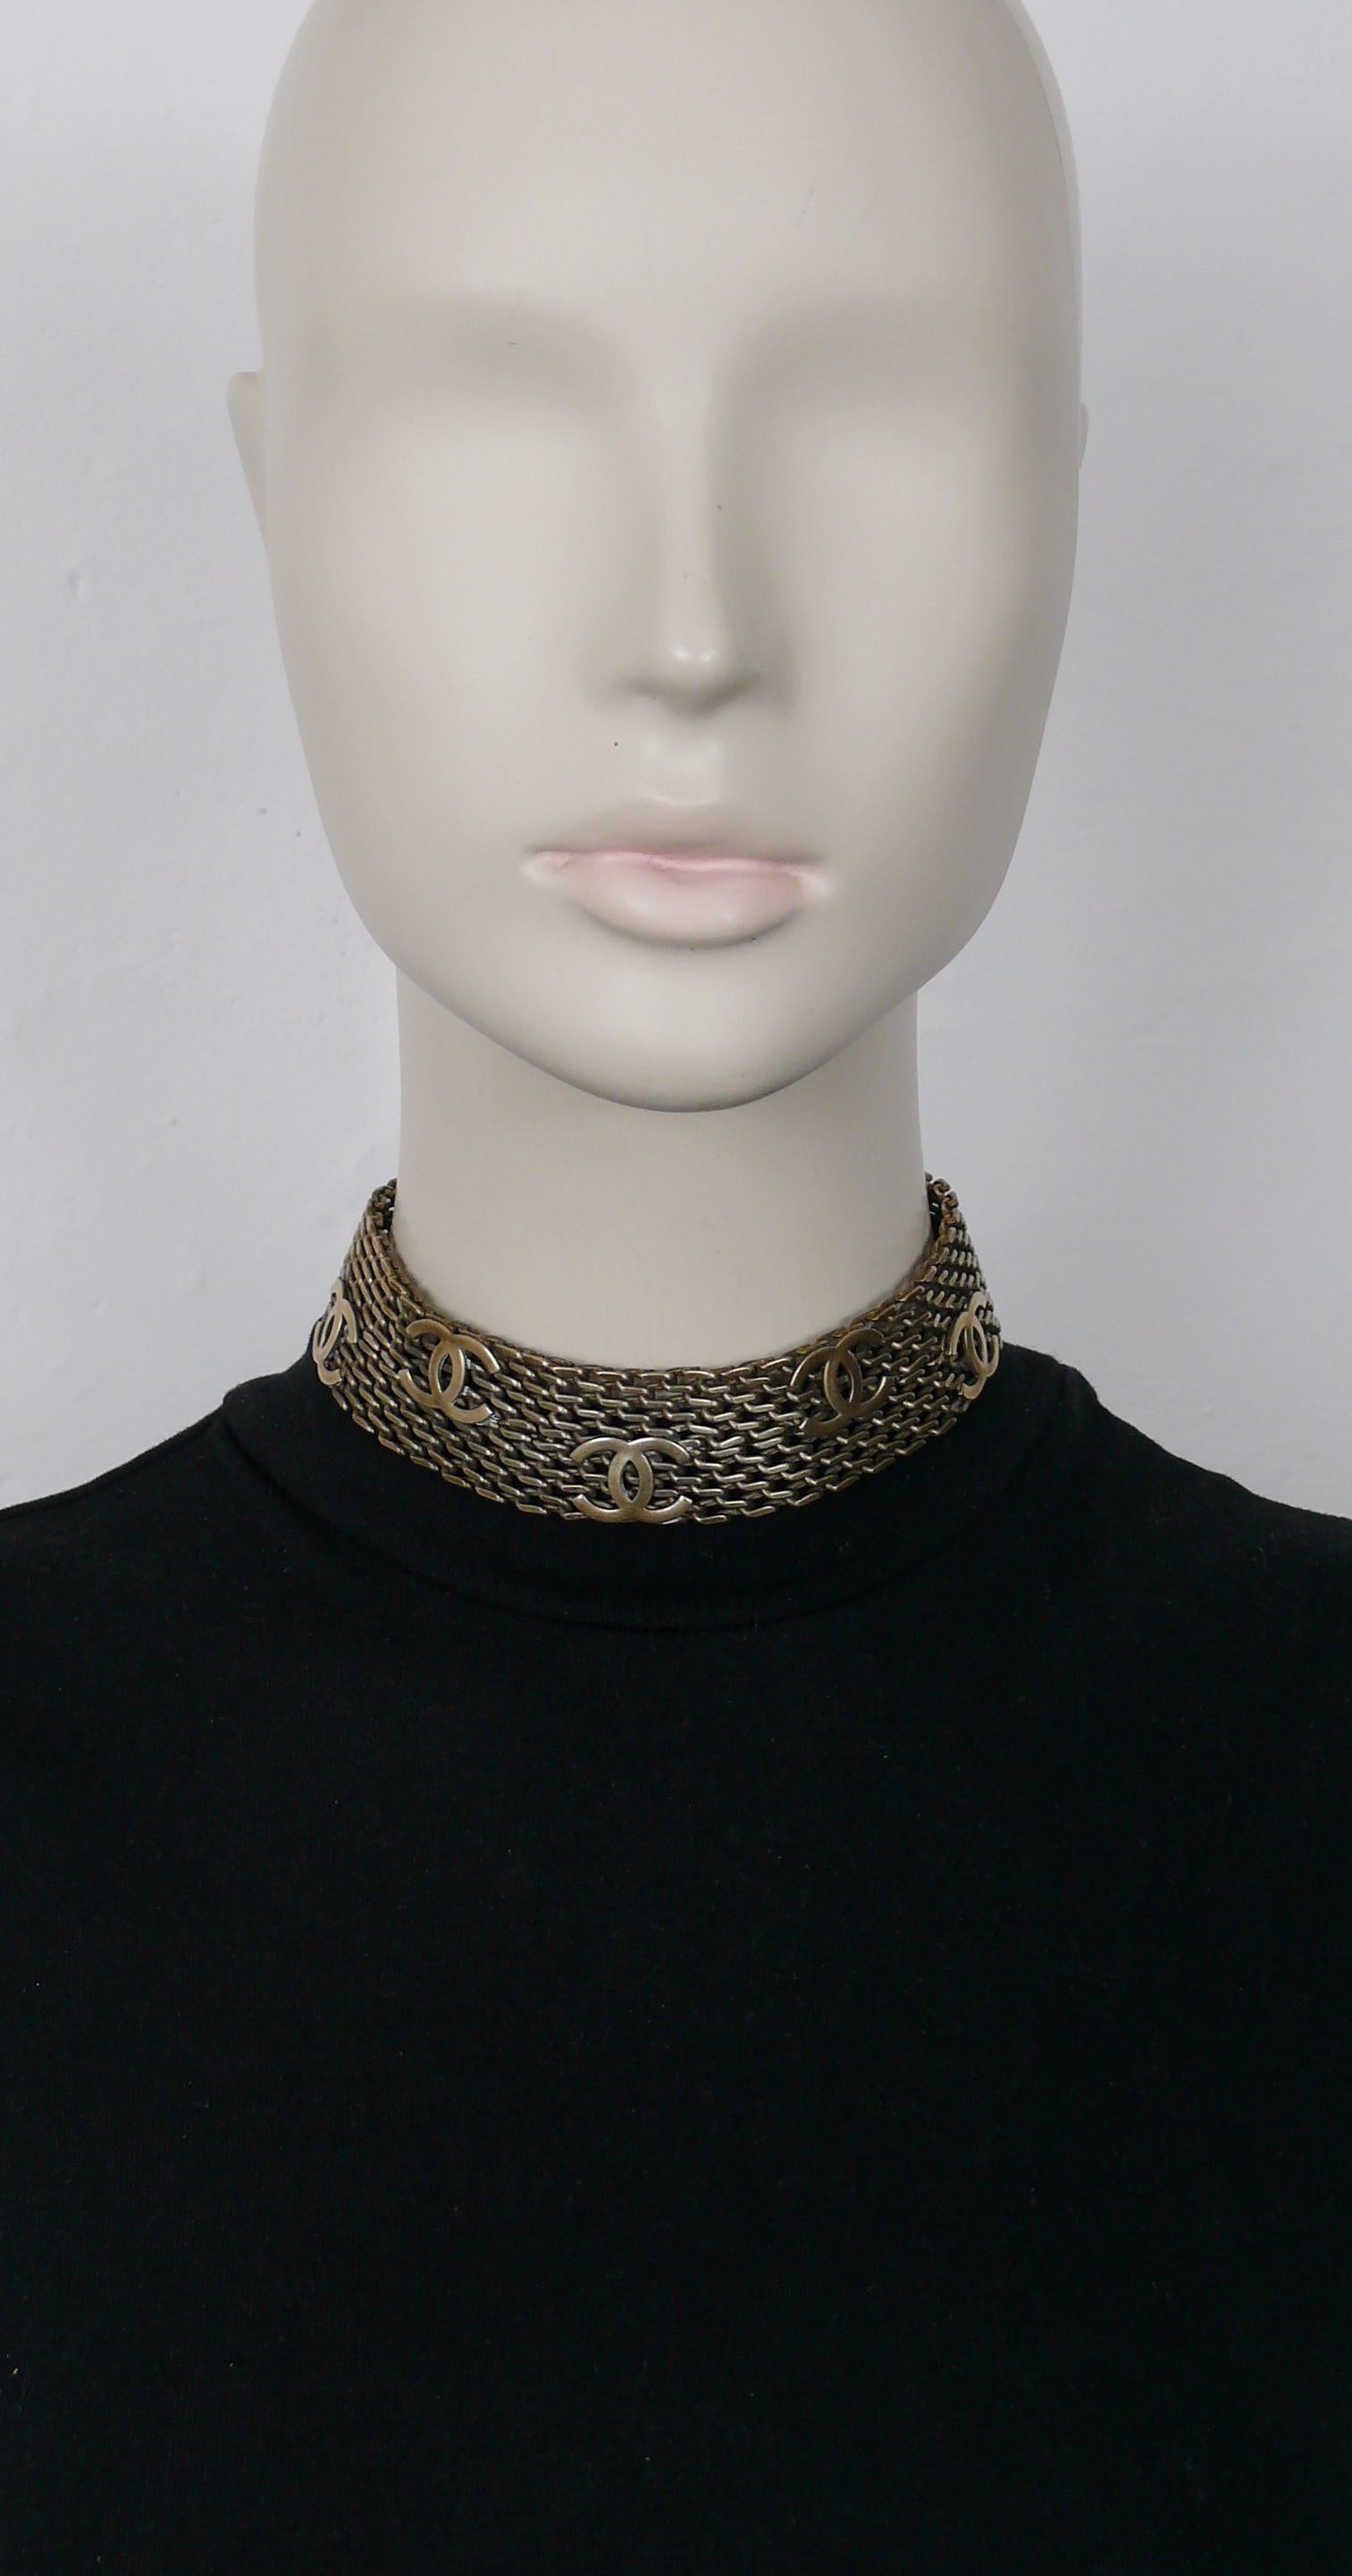 CHANEL by KARL LAGERFELD vintage antiqued bronze toned mesh chainmail choker necklace featuring five CC logos.

Secure clasp closure with CC logo.

Embossed CHANEL 97 A Made in France.

Indicative measurements : length approx. 34 cm (13.39 inches) /